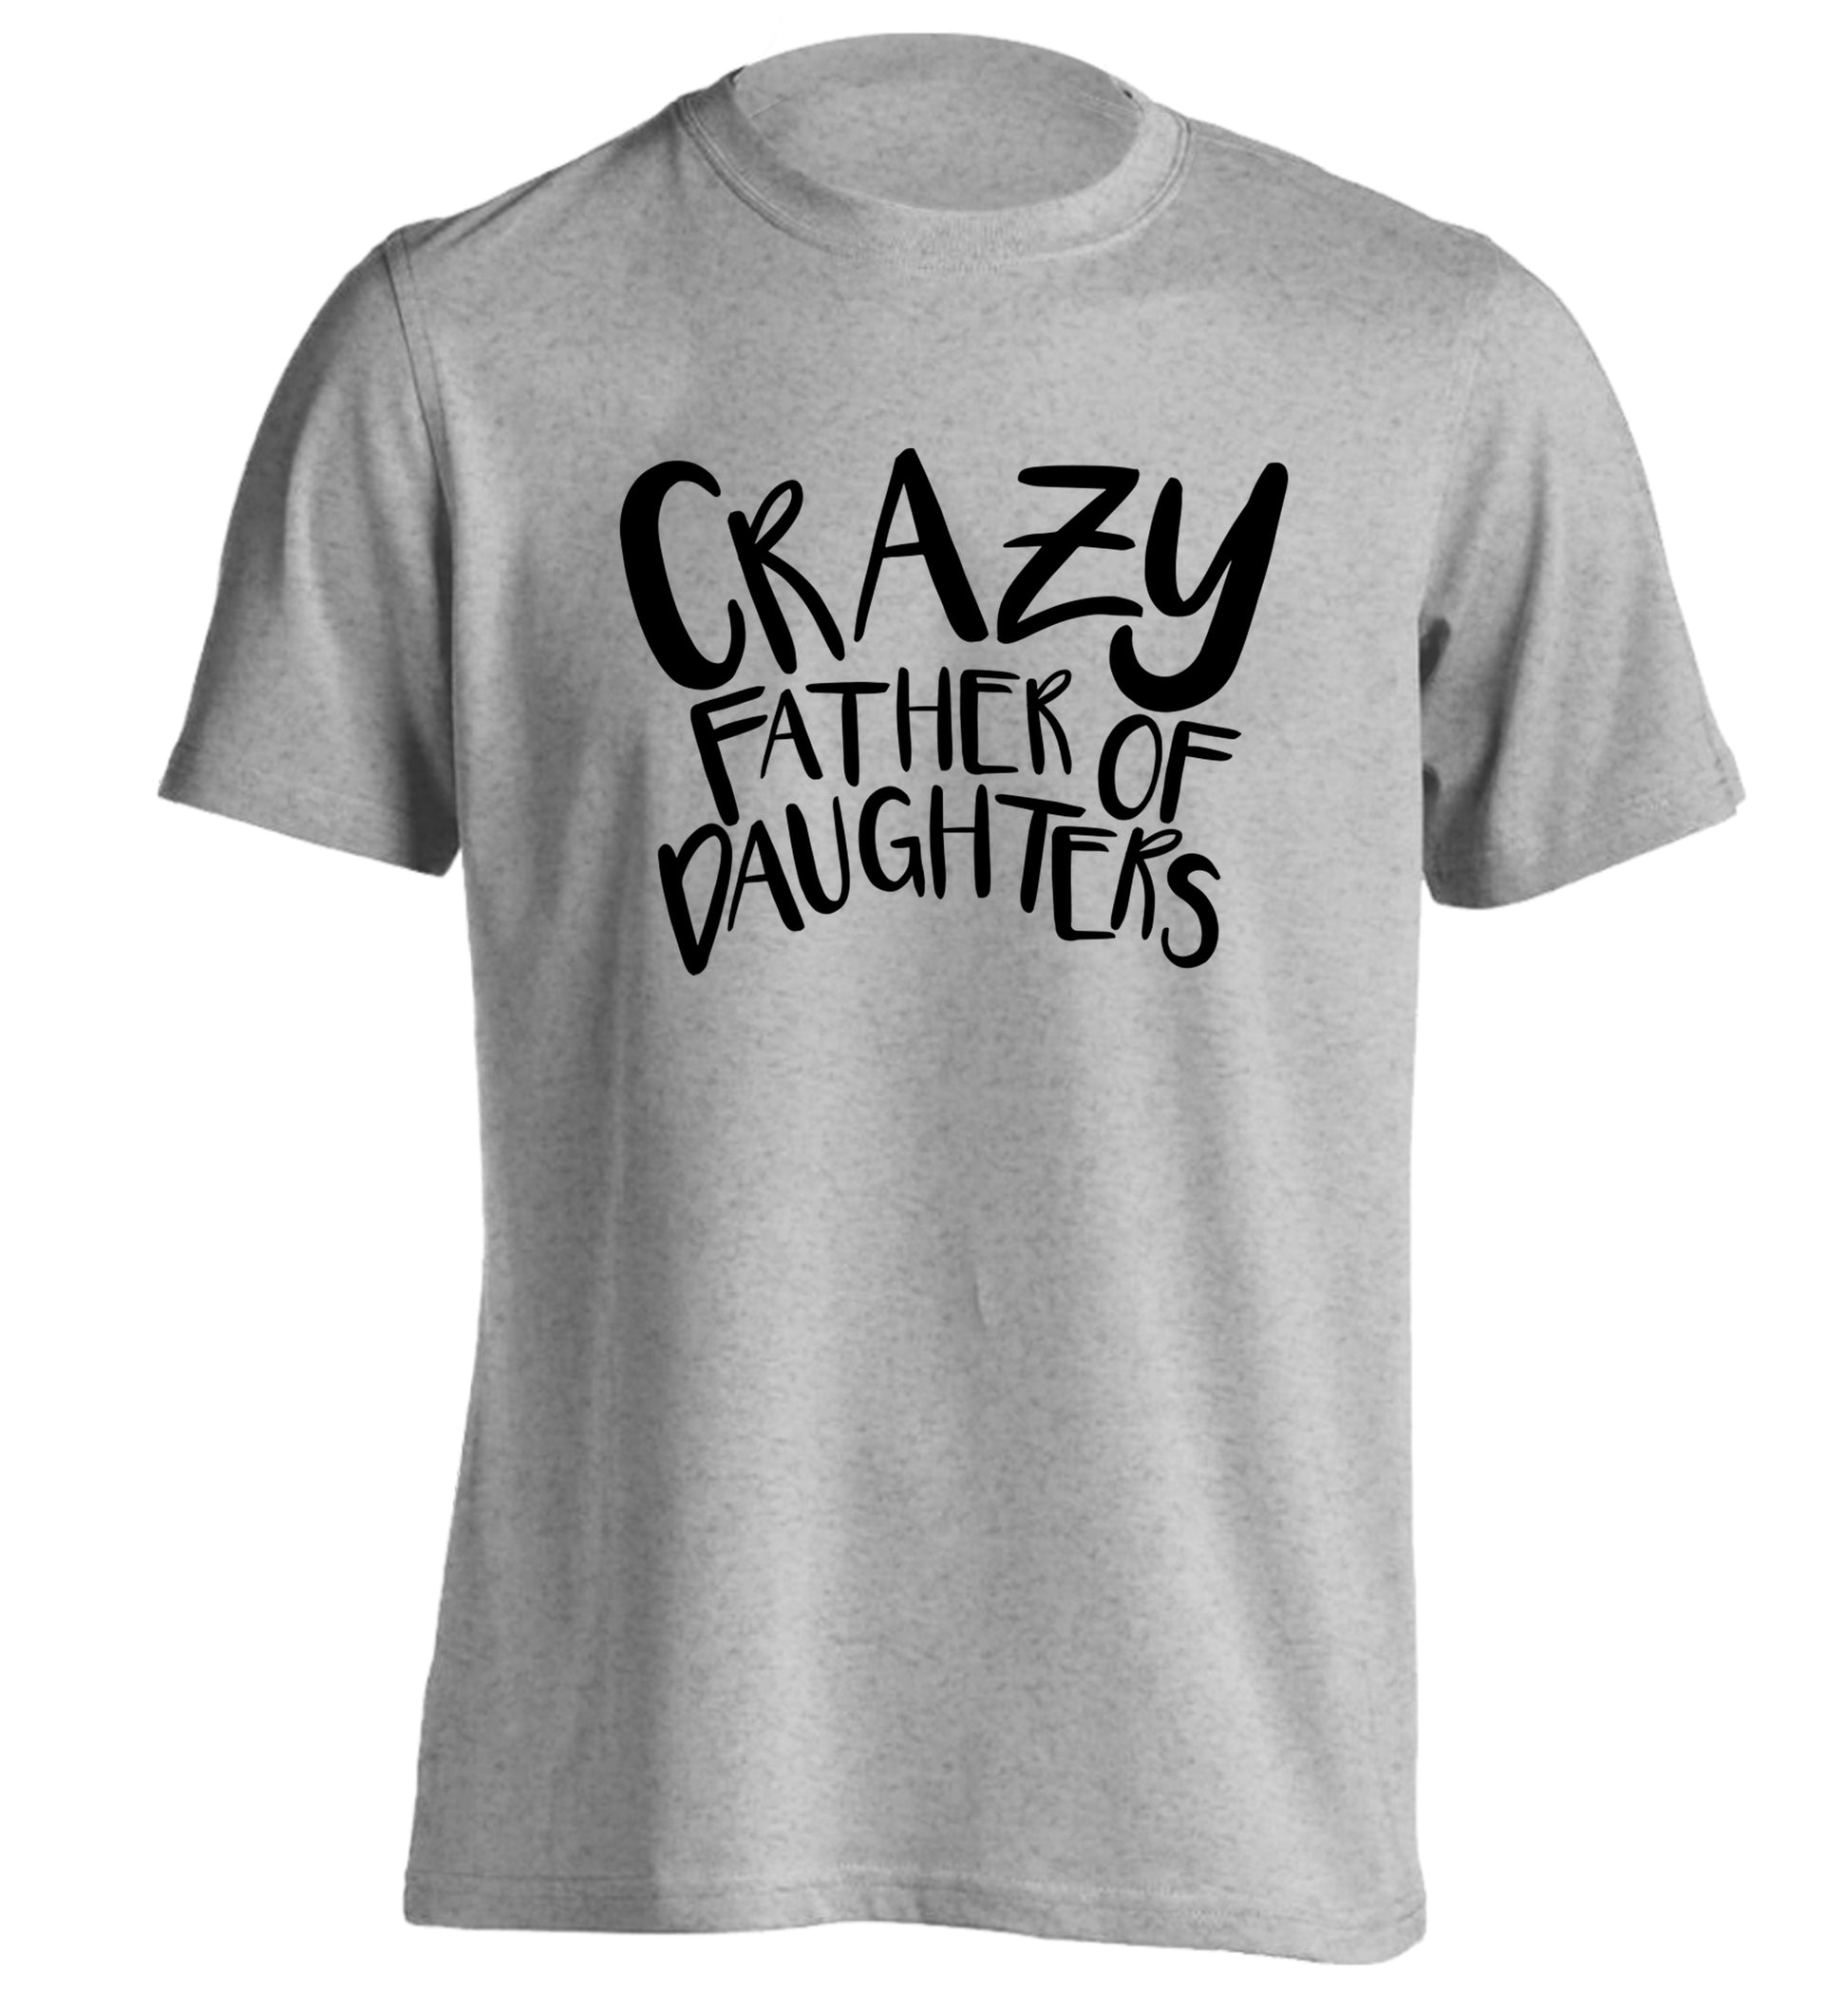 Crazy father of daughters adults unisex grey Tshirt 2XL